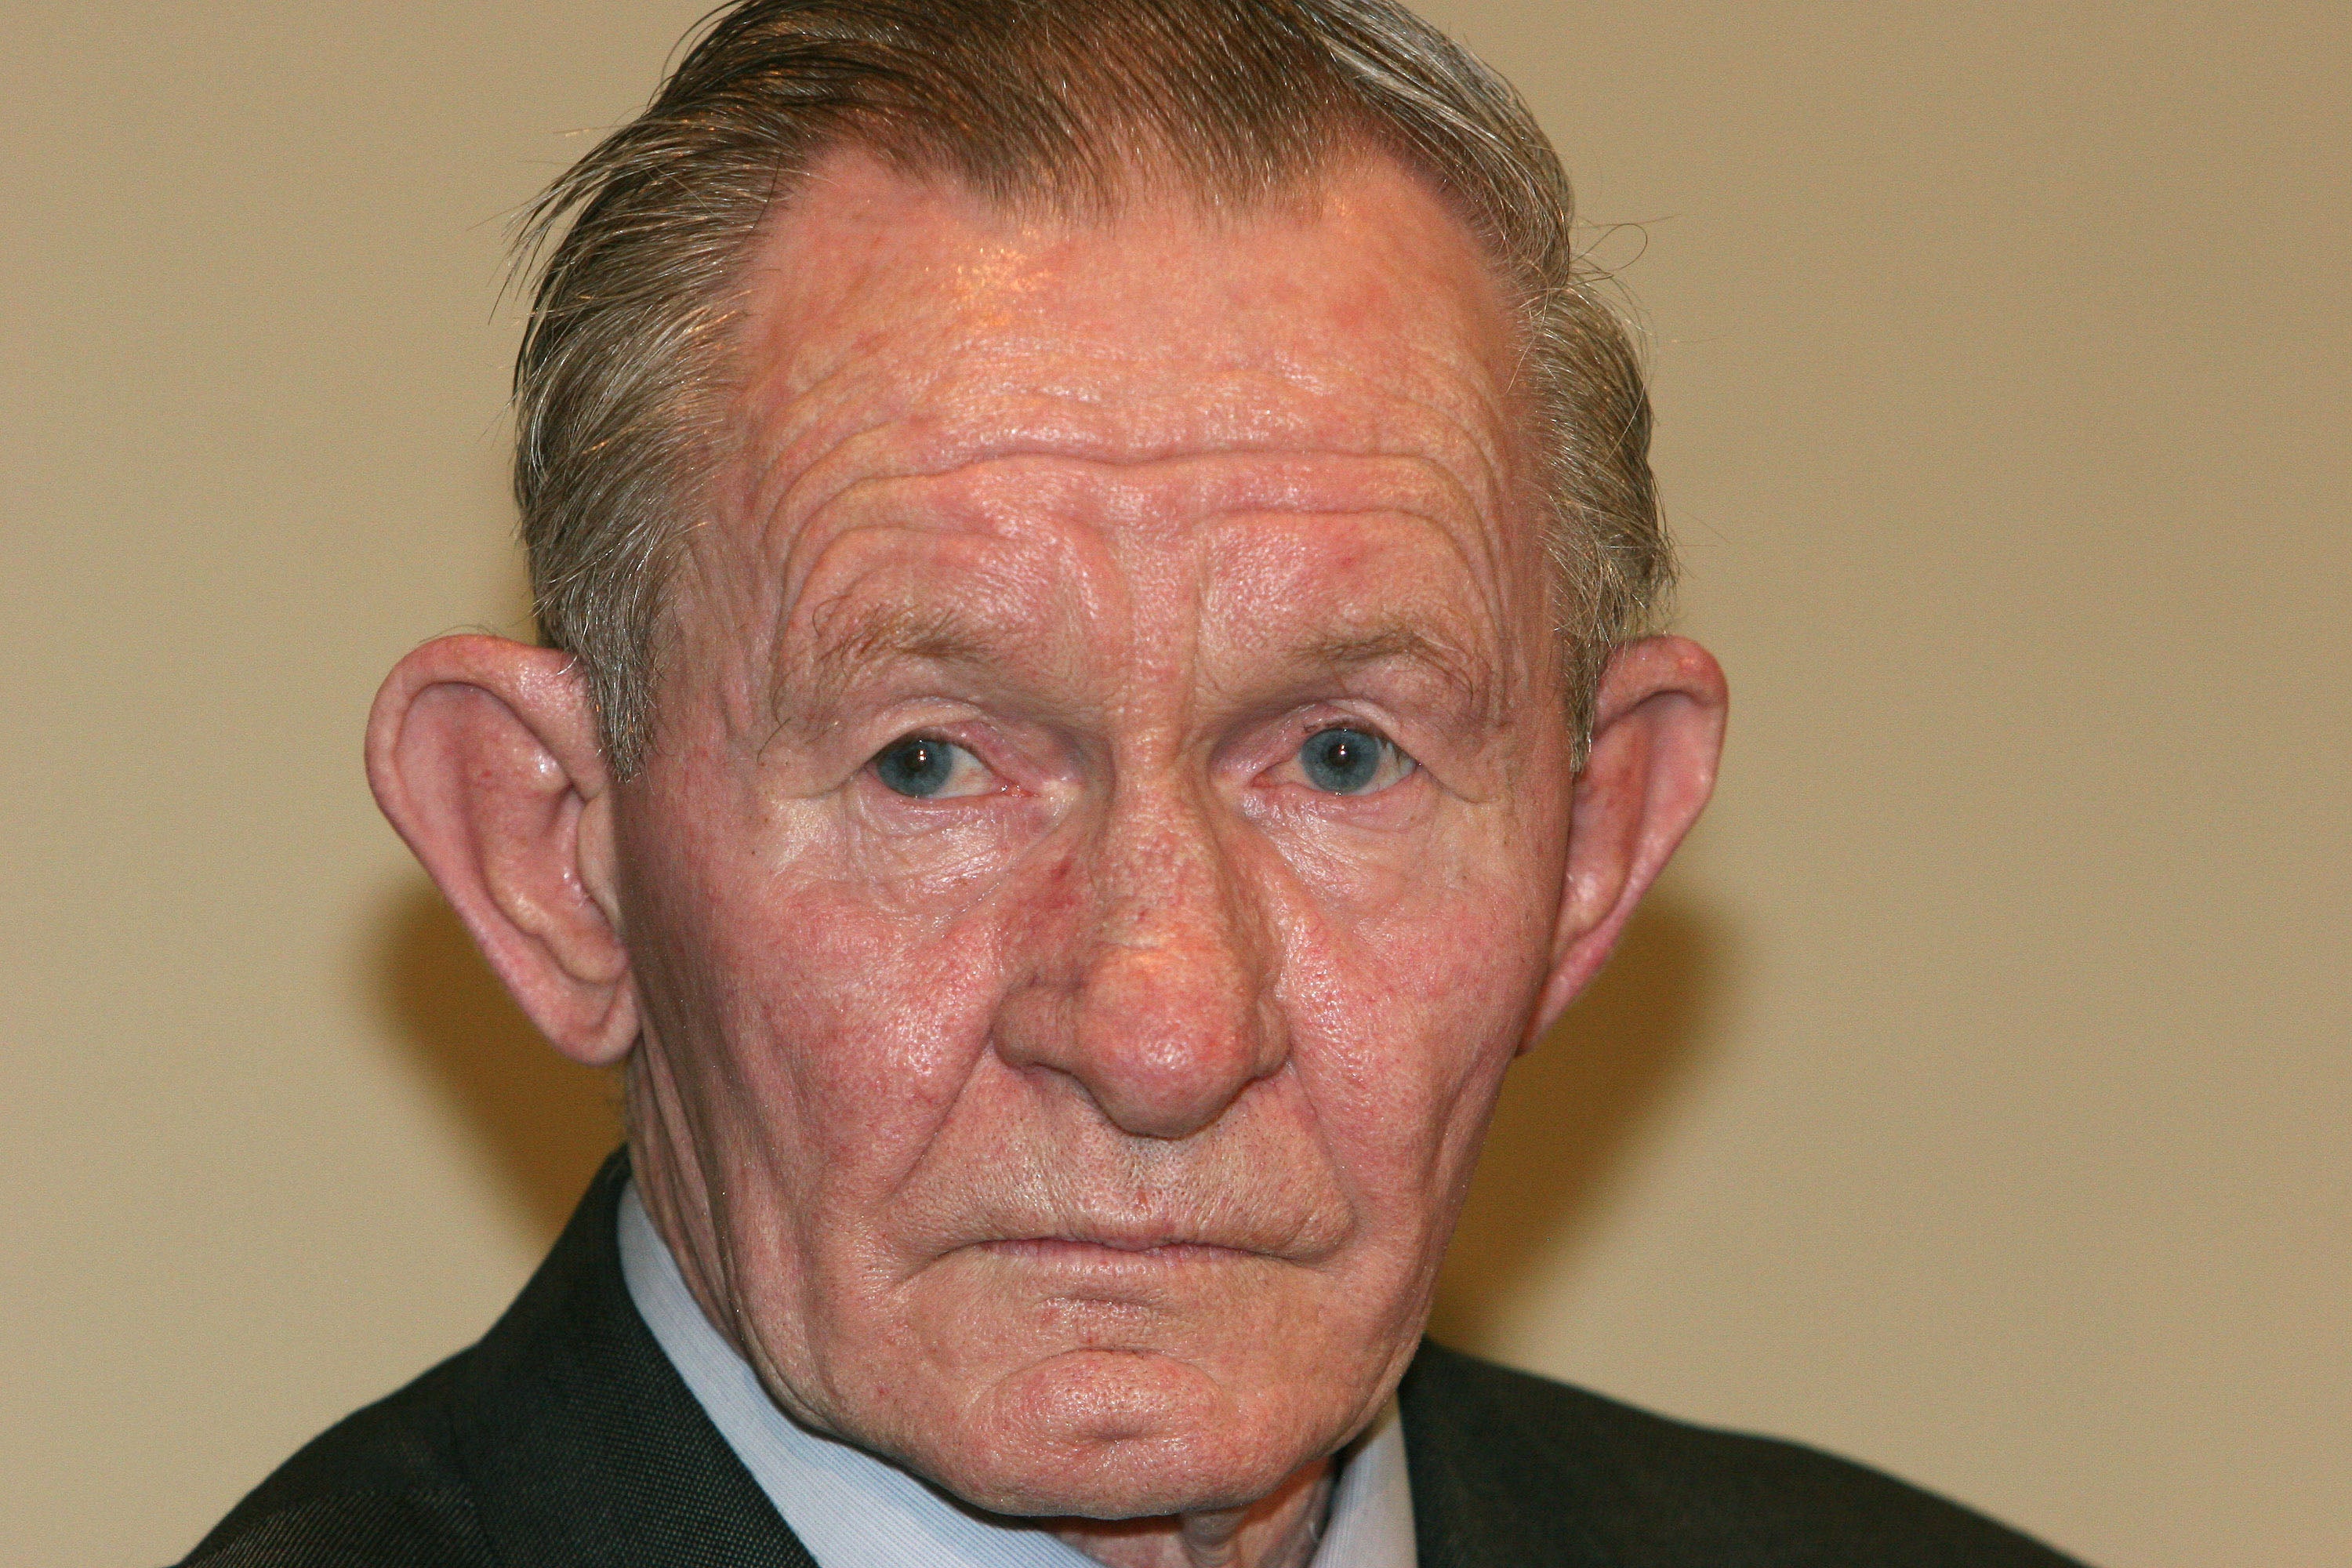 Charles Jenkins deserted the US Army and was captive in North Korea for over 39 years